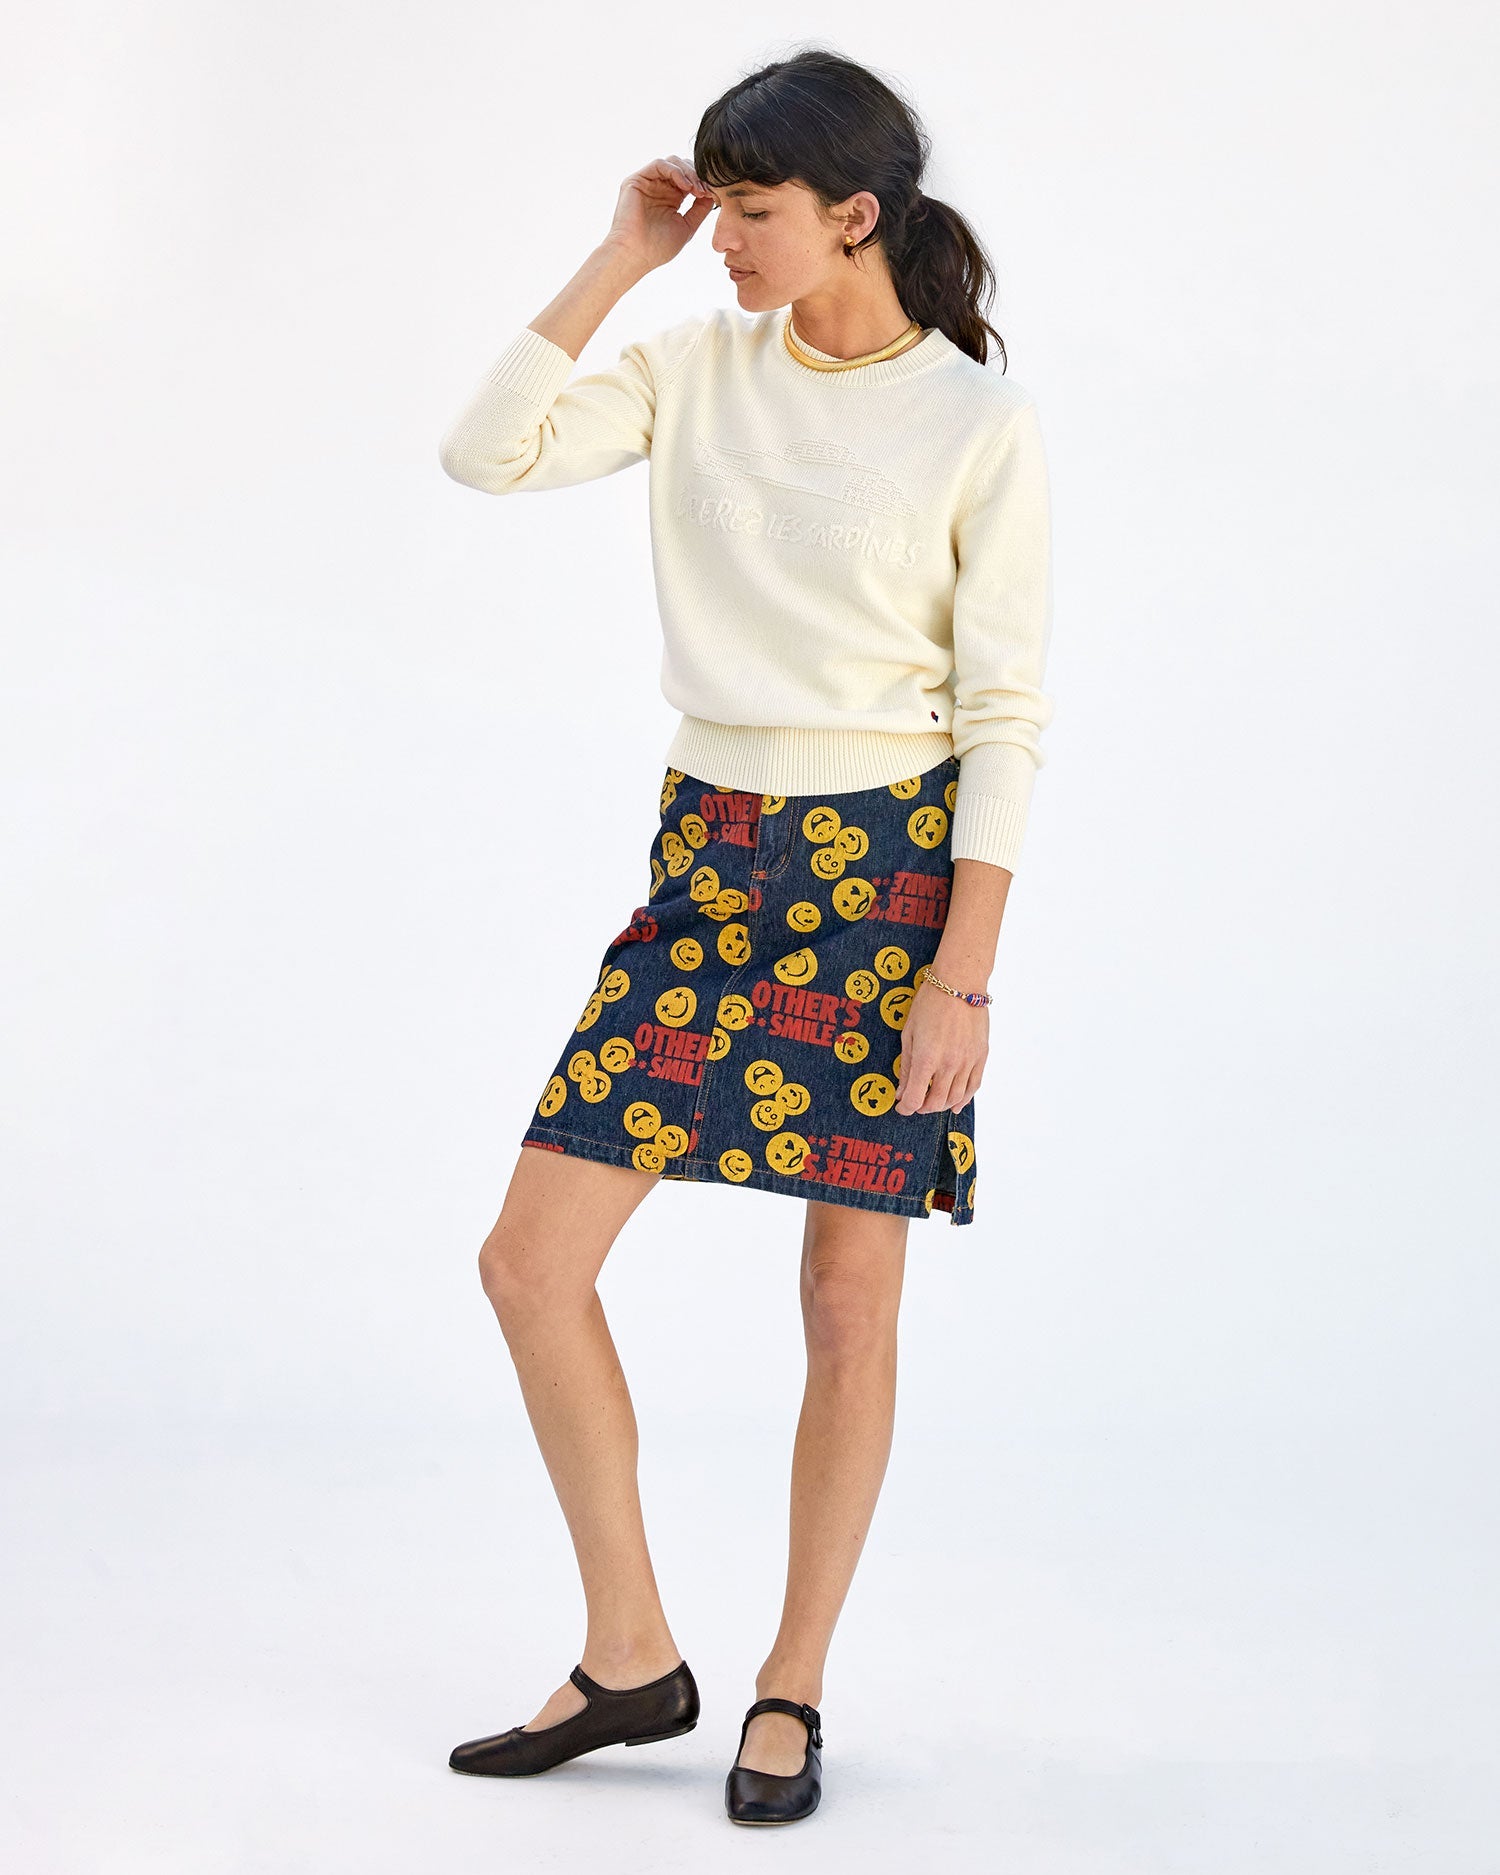 danica wearing the cream liberez les sardines Classic Sweater with a skirt with emojis on it with black mary janes. she's brushing her hair behind her ear